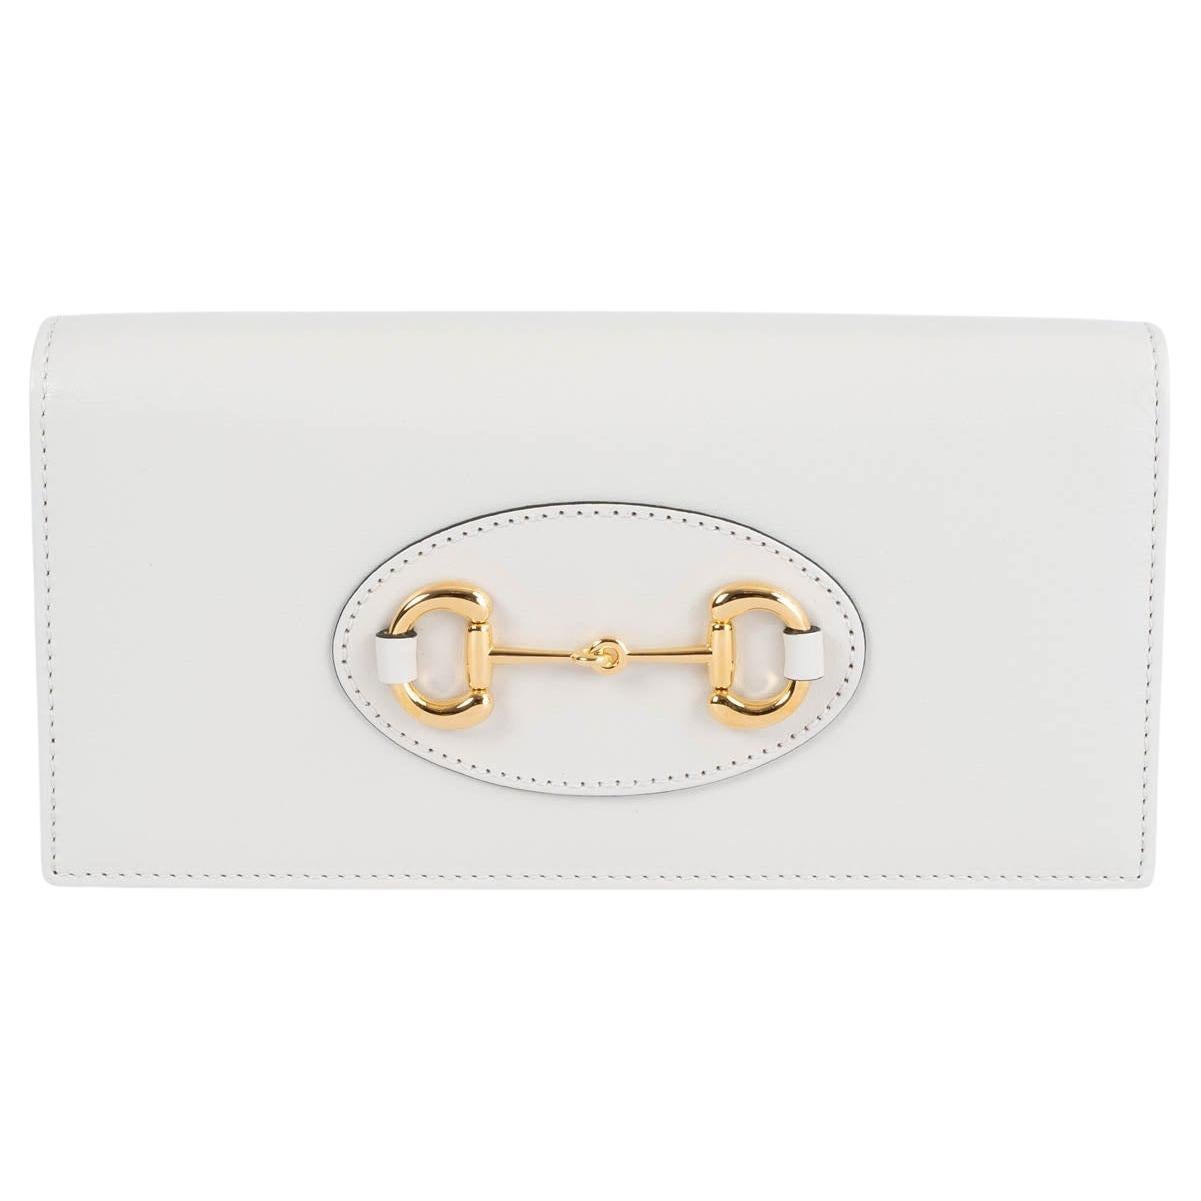 GUCCI ivory leather HORSEBIT 1955 Wallet on Chain WOC Bag